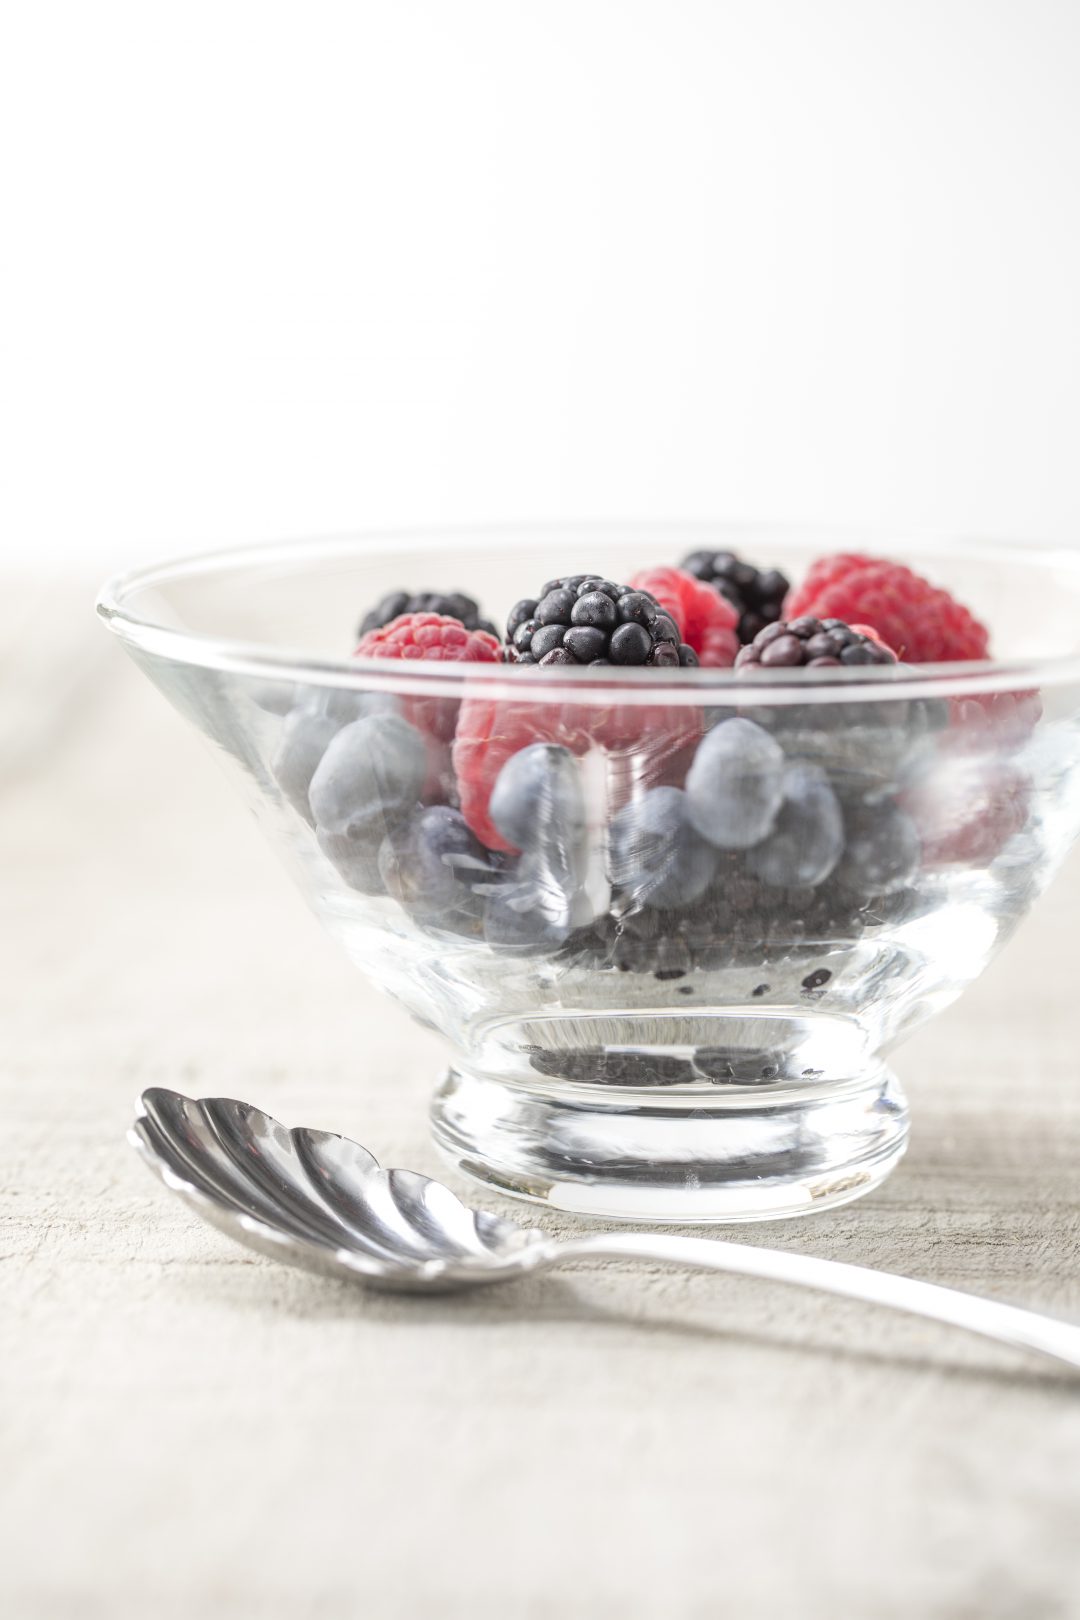 Rasberries and blueberries in a bowl next to a spoon.